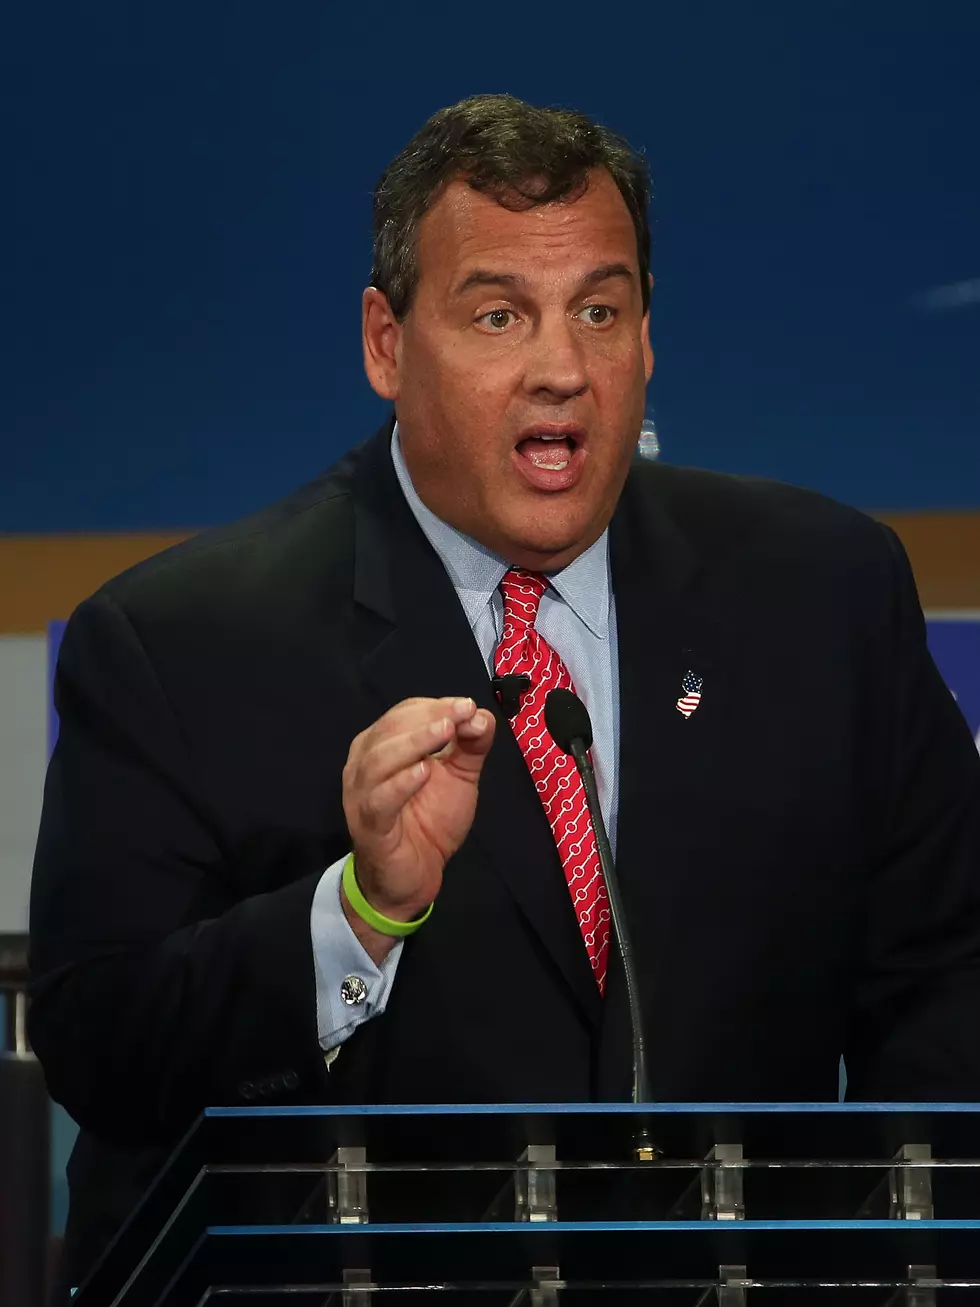 WATCH: Daily Show&#8217;s Noah Trevor presses Chris Christie on &#8216;FedEx&#8217; tracking for immigrants